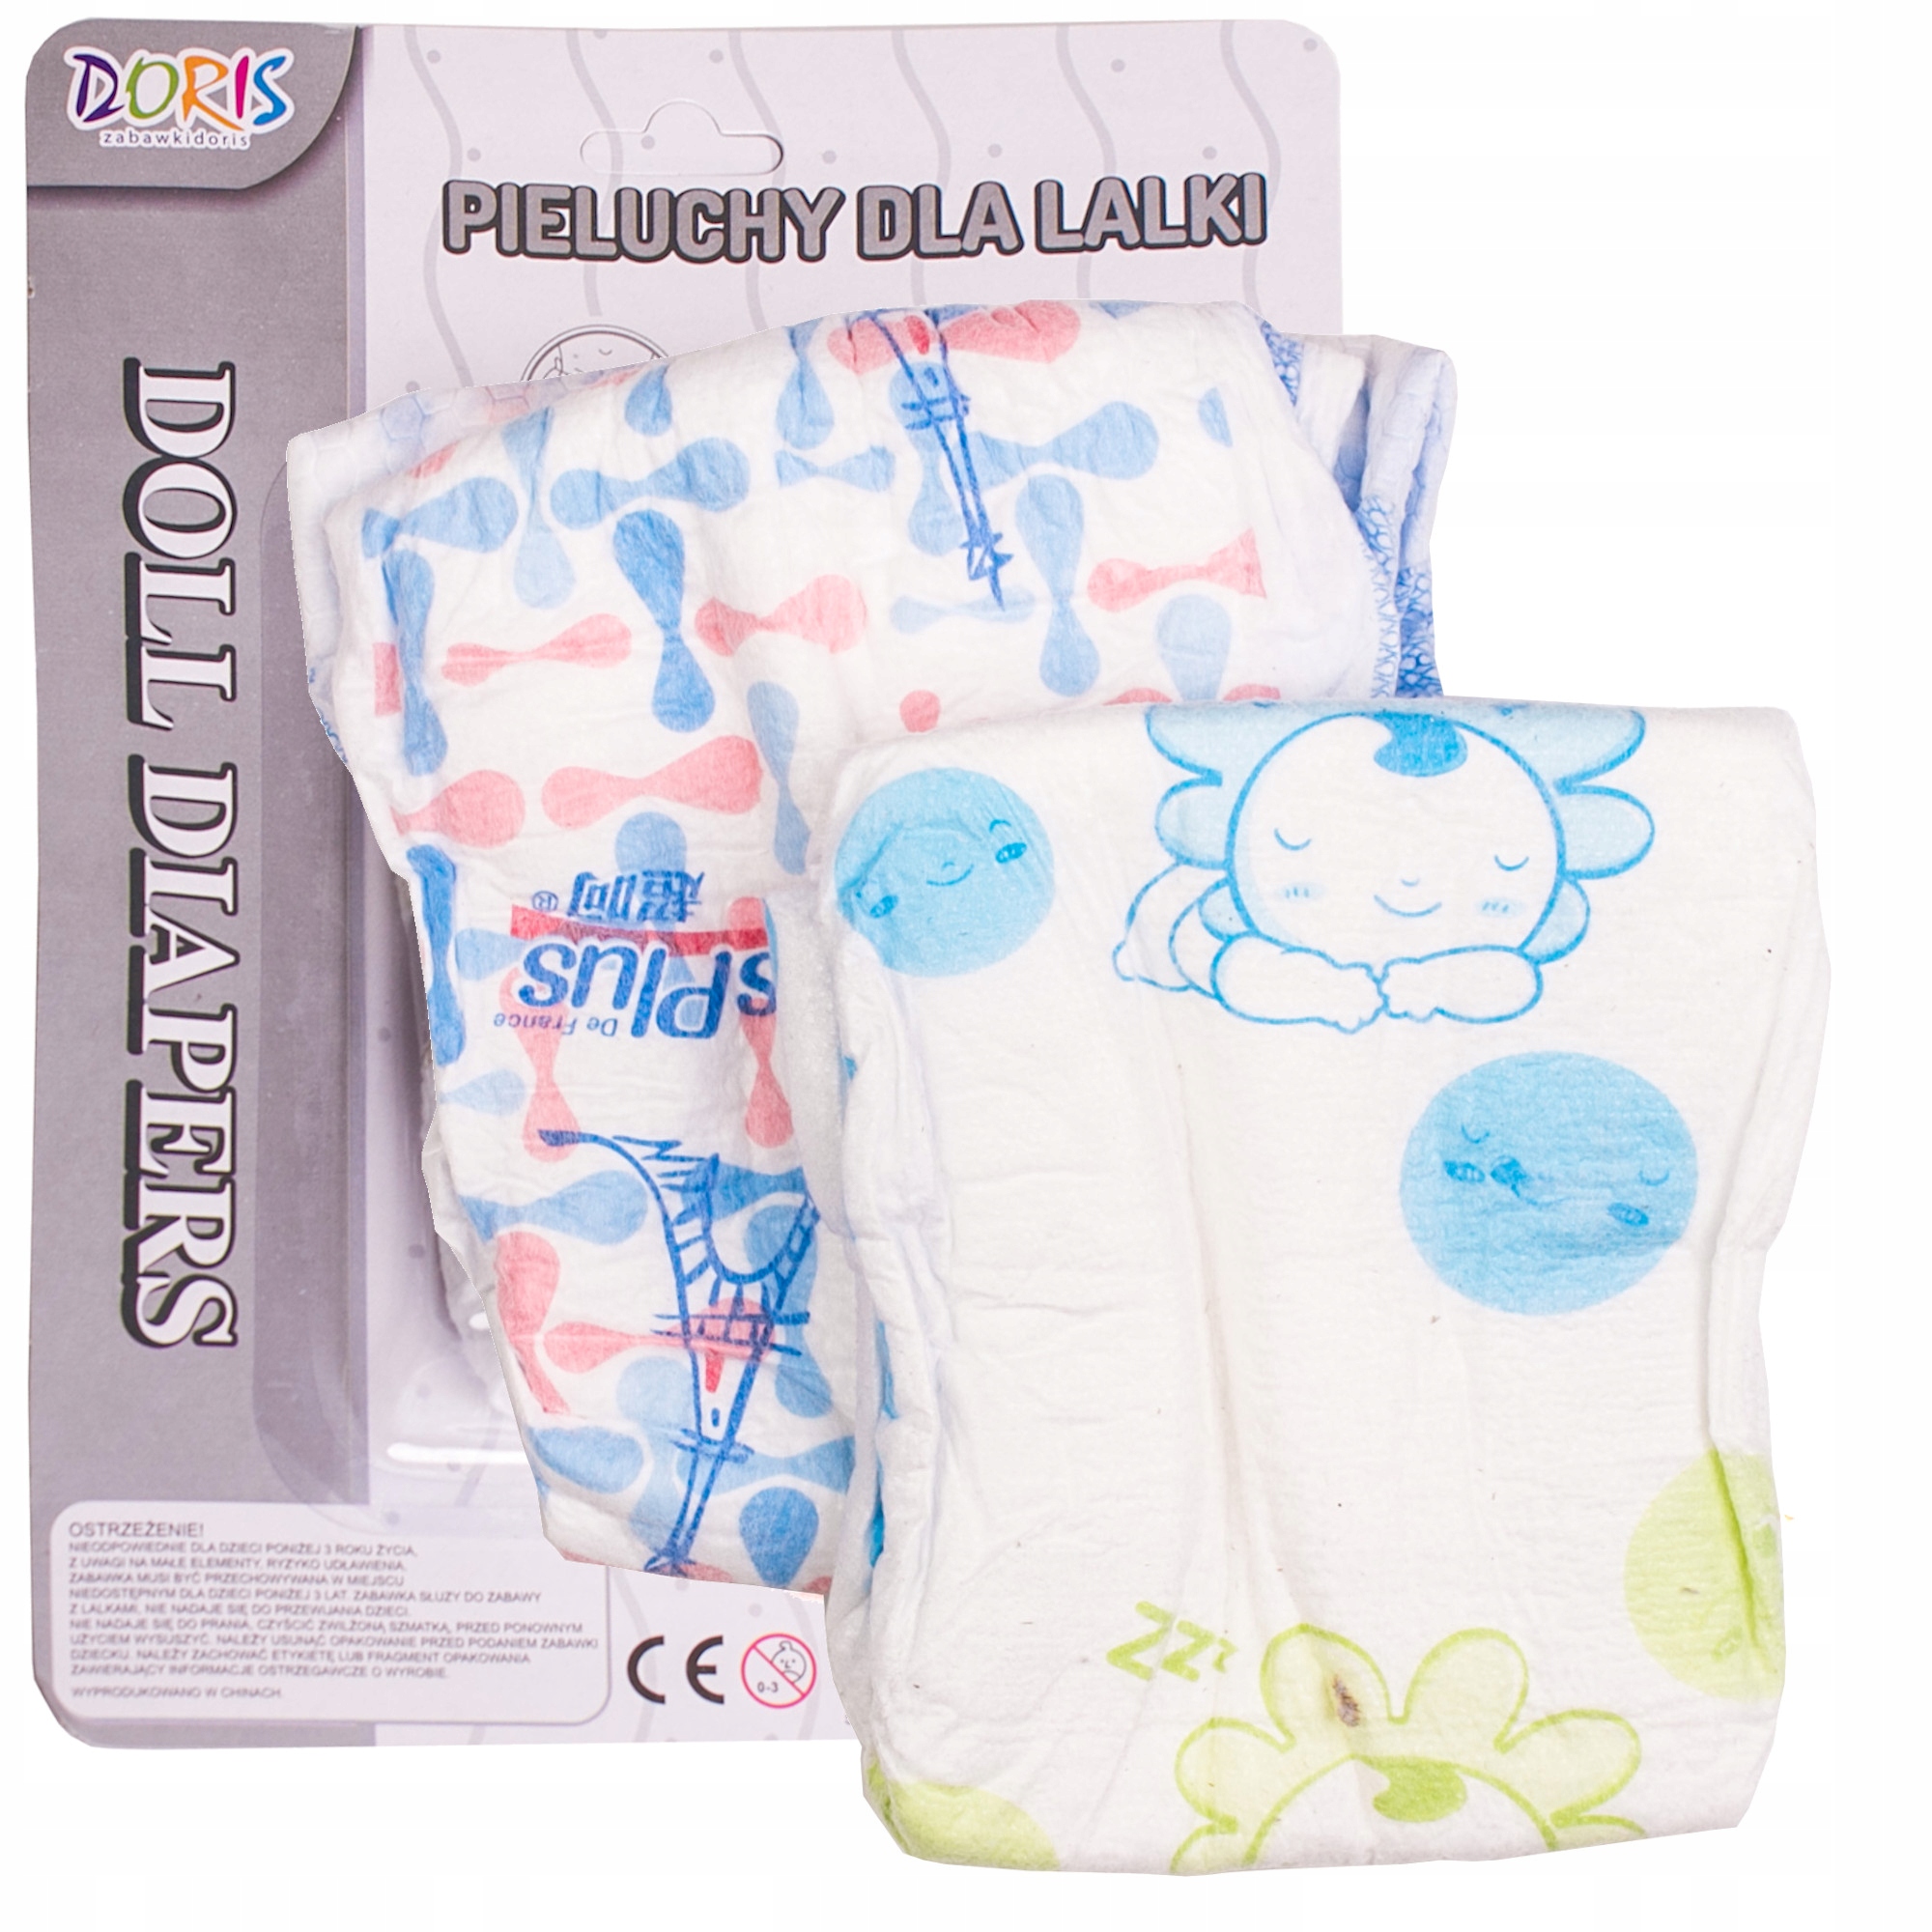 pampers active baby 5 54szt kaufland